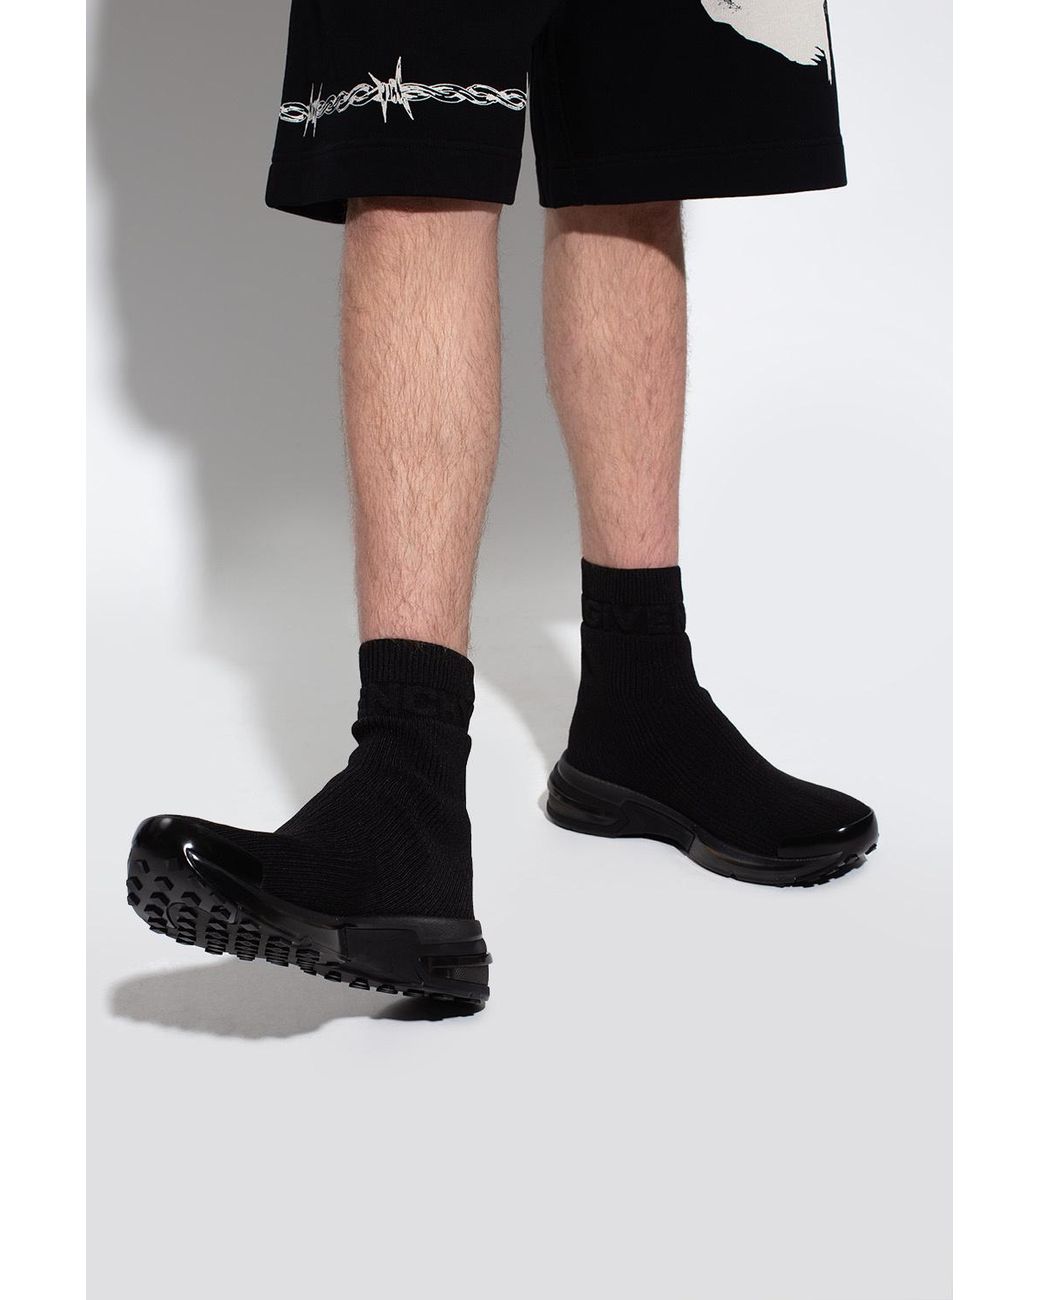 Givenchy 'giv 1' Sneakers in Black for Men - Lyst